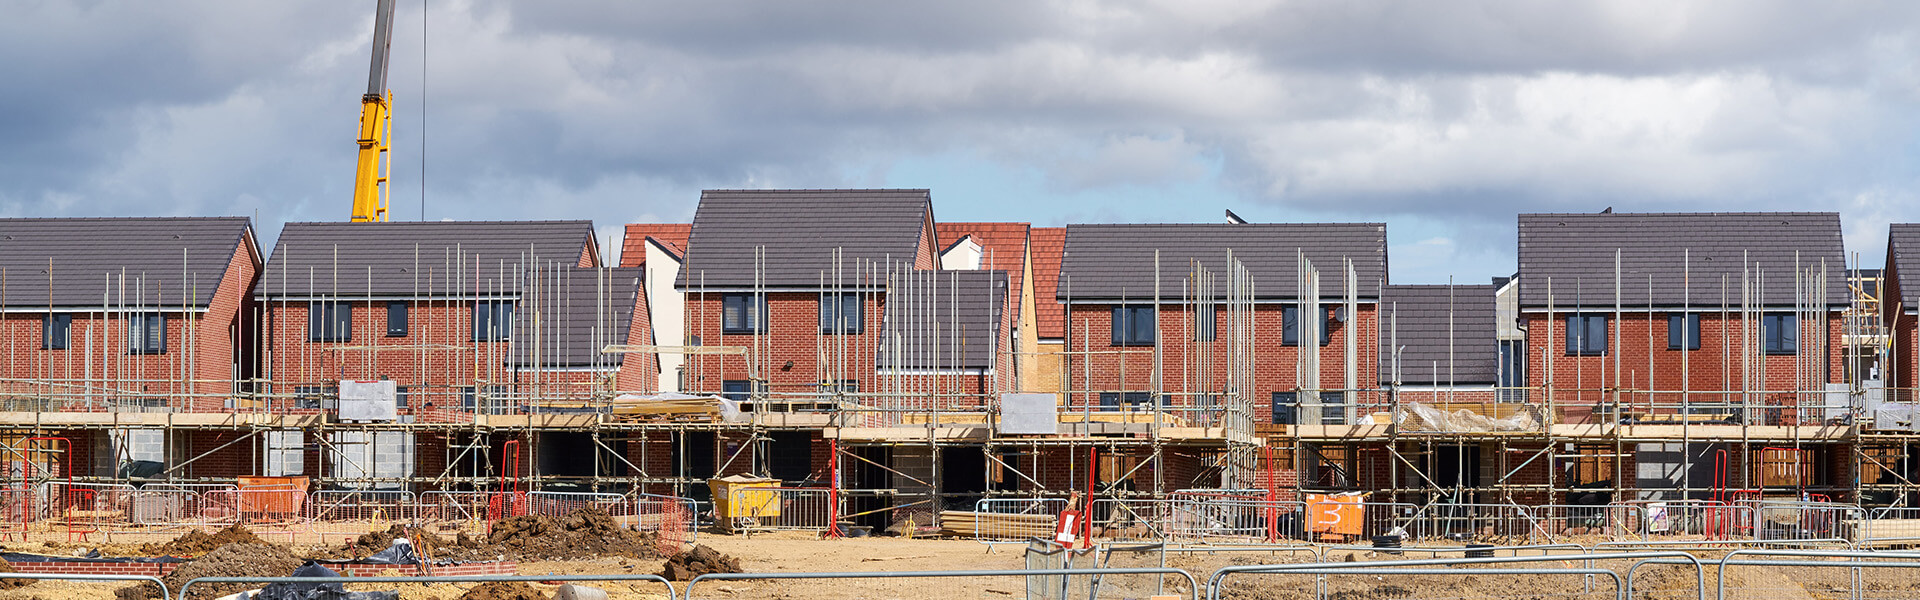 The long-awaited Renters Reform Bill is finally introduced into Parliament